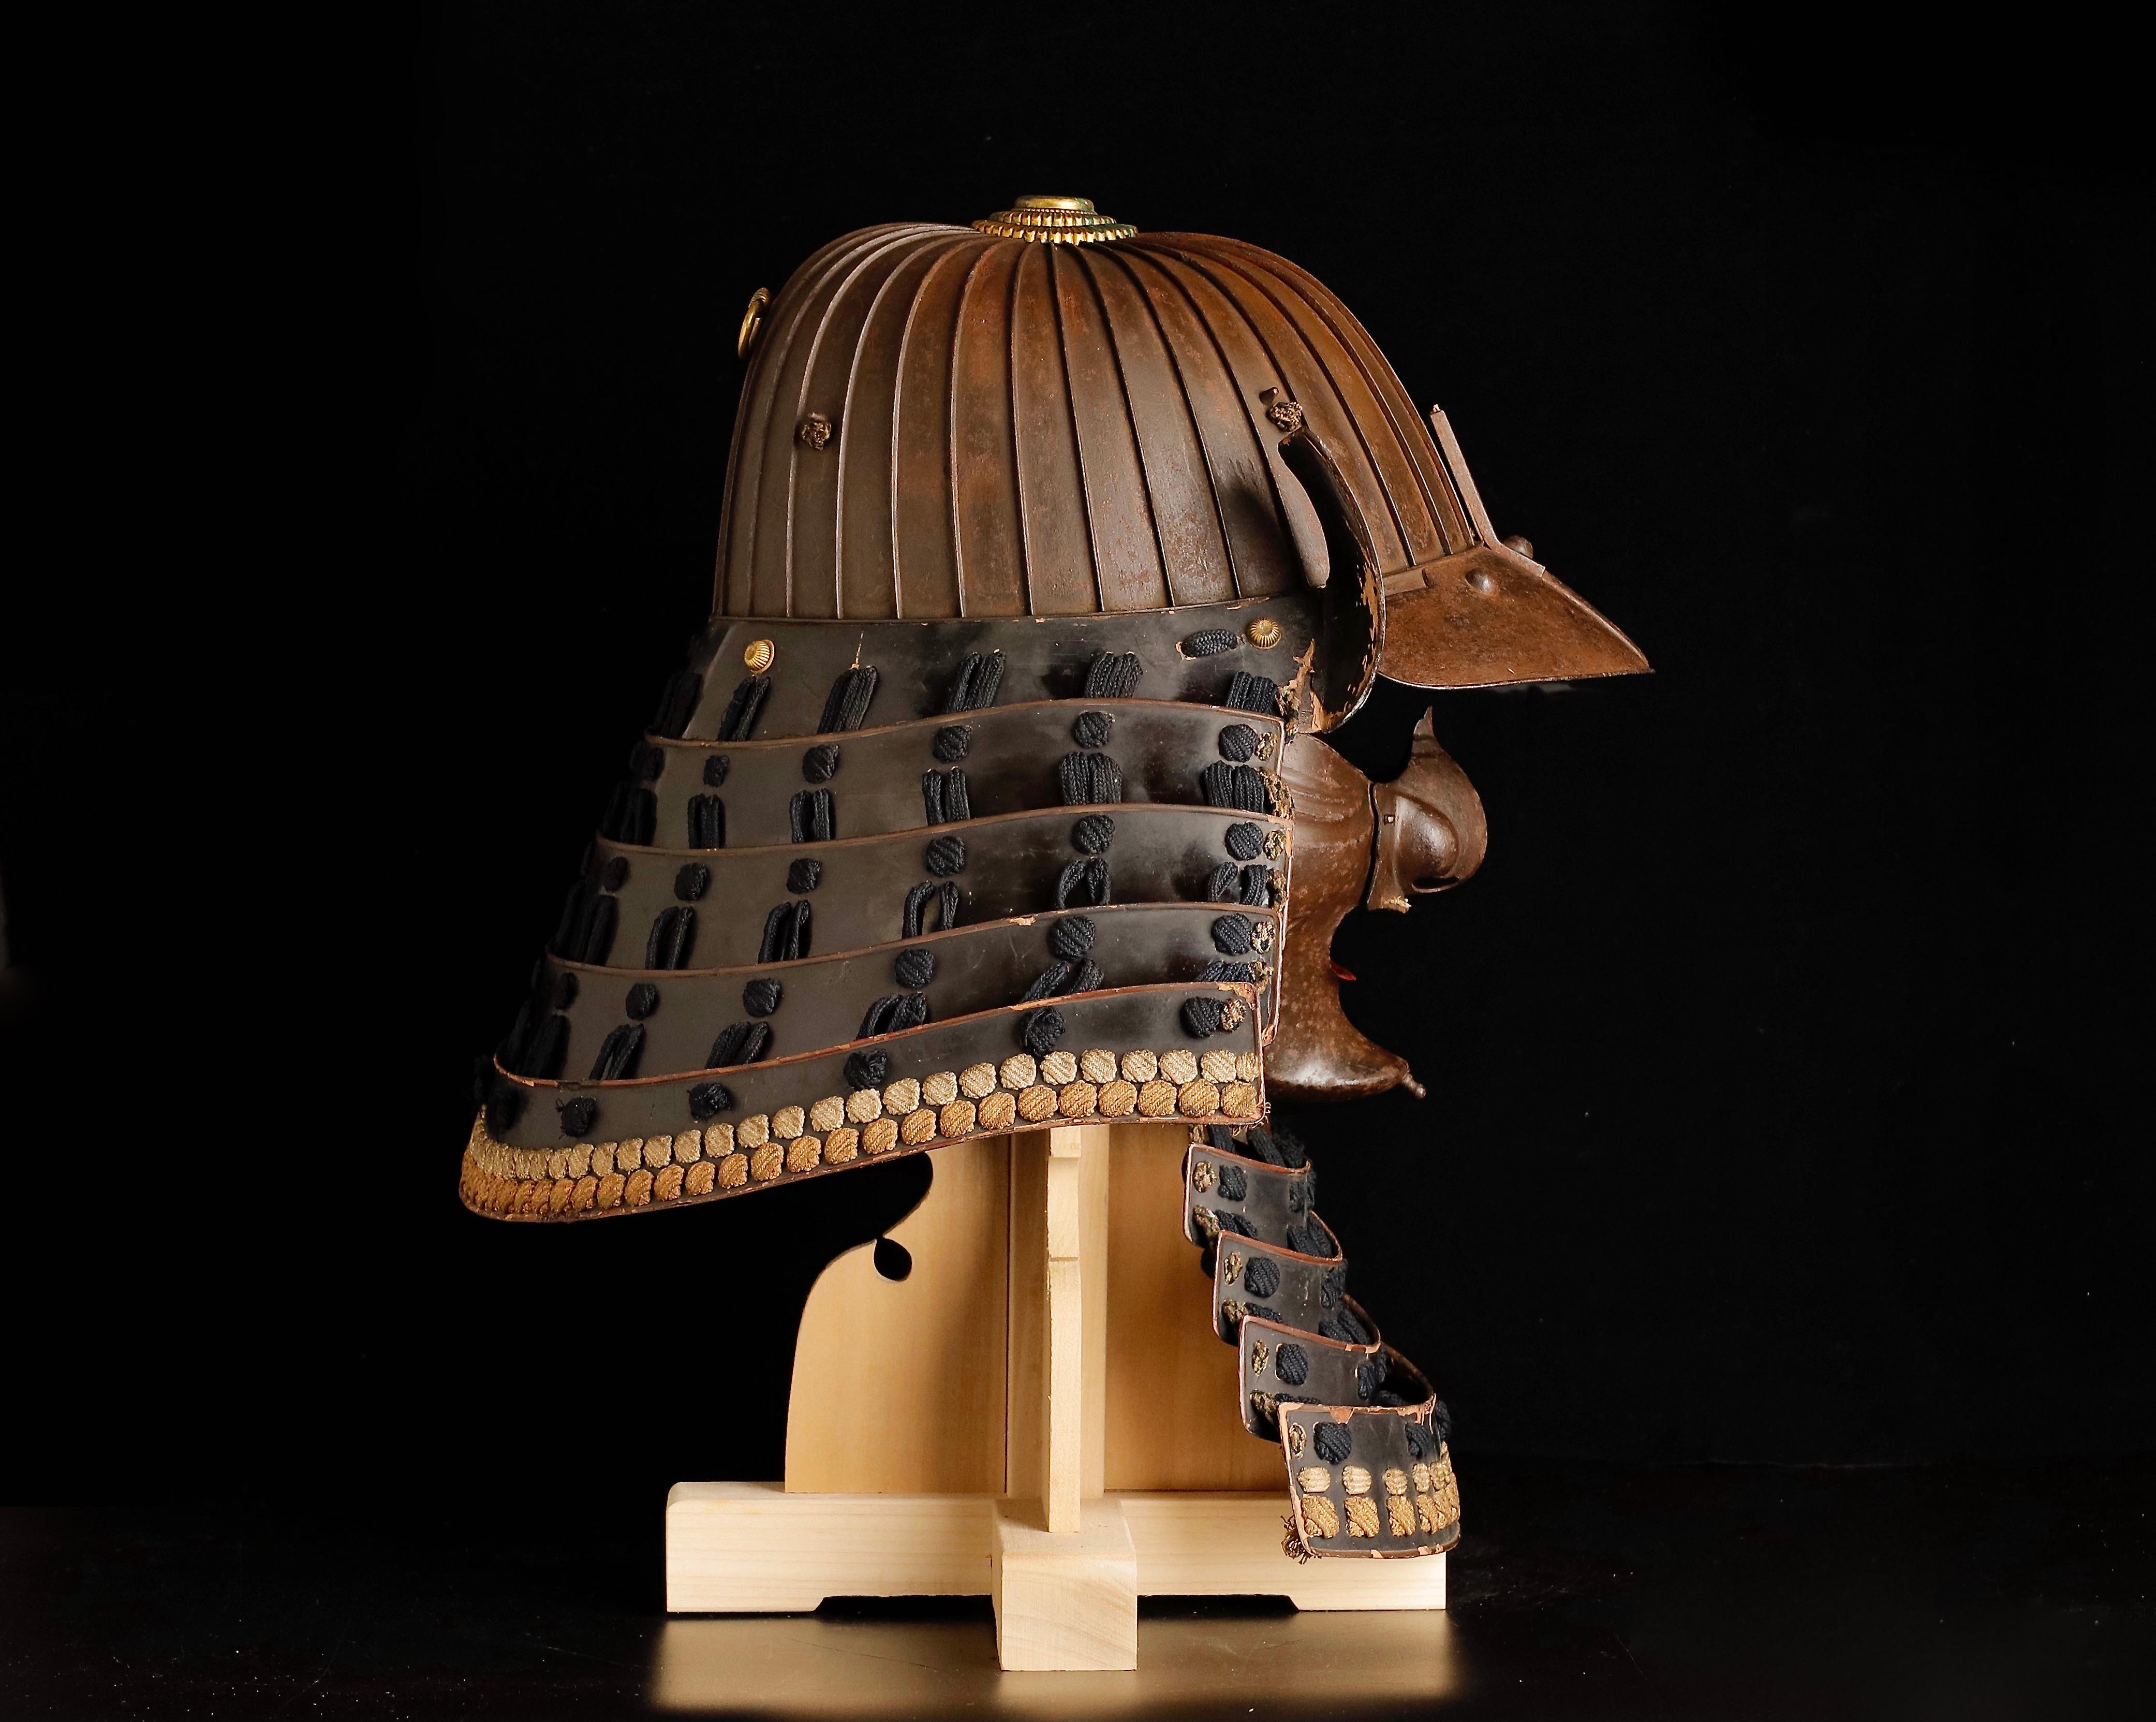 Hand-Crafted Edo-Era Samurai Helmet and Mask Set, an Authentic Piece of History from the 17th